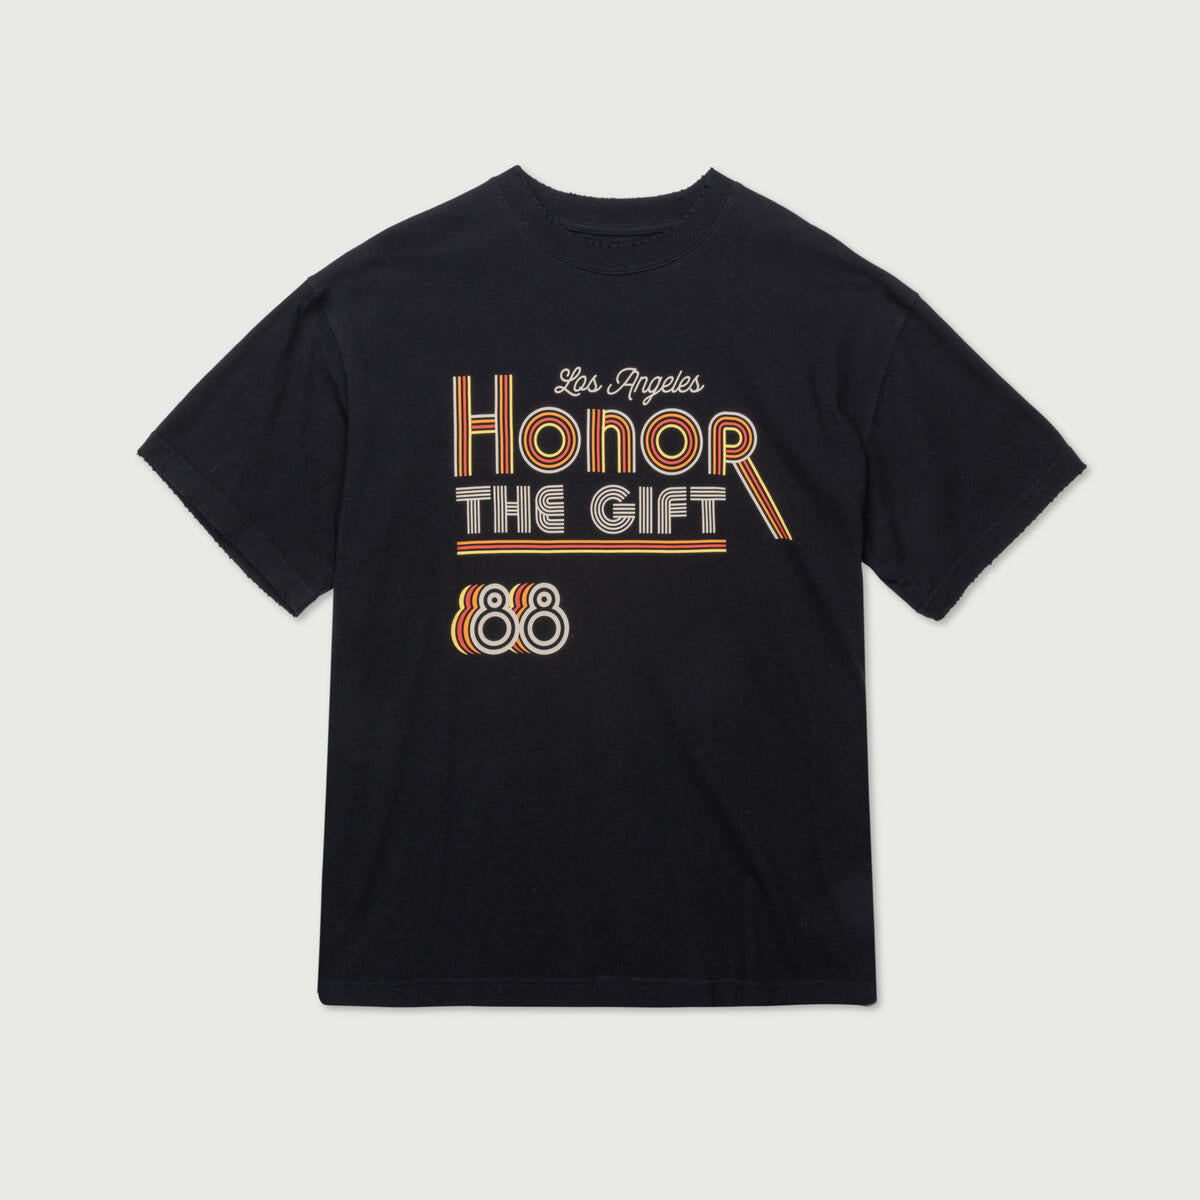 Honor The Gift A-spring Retro Honor Tee- BLACK